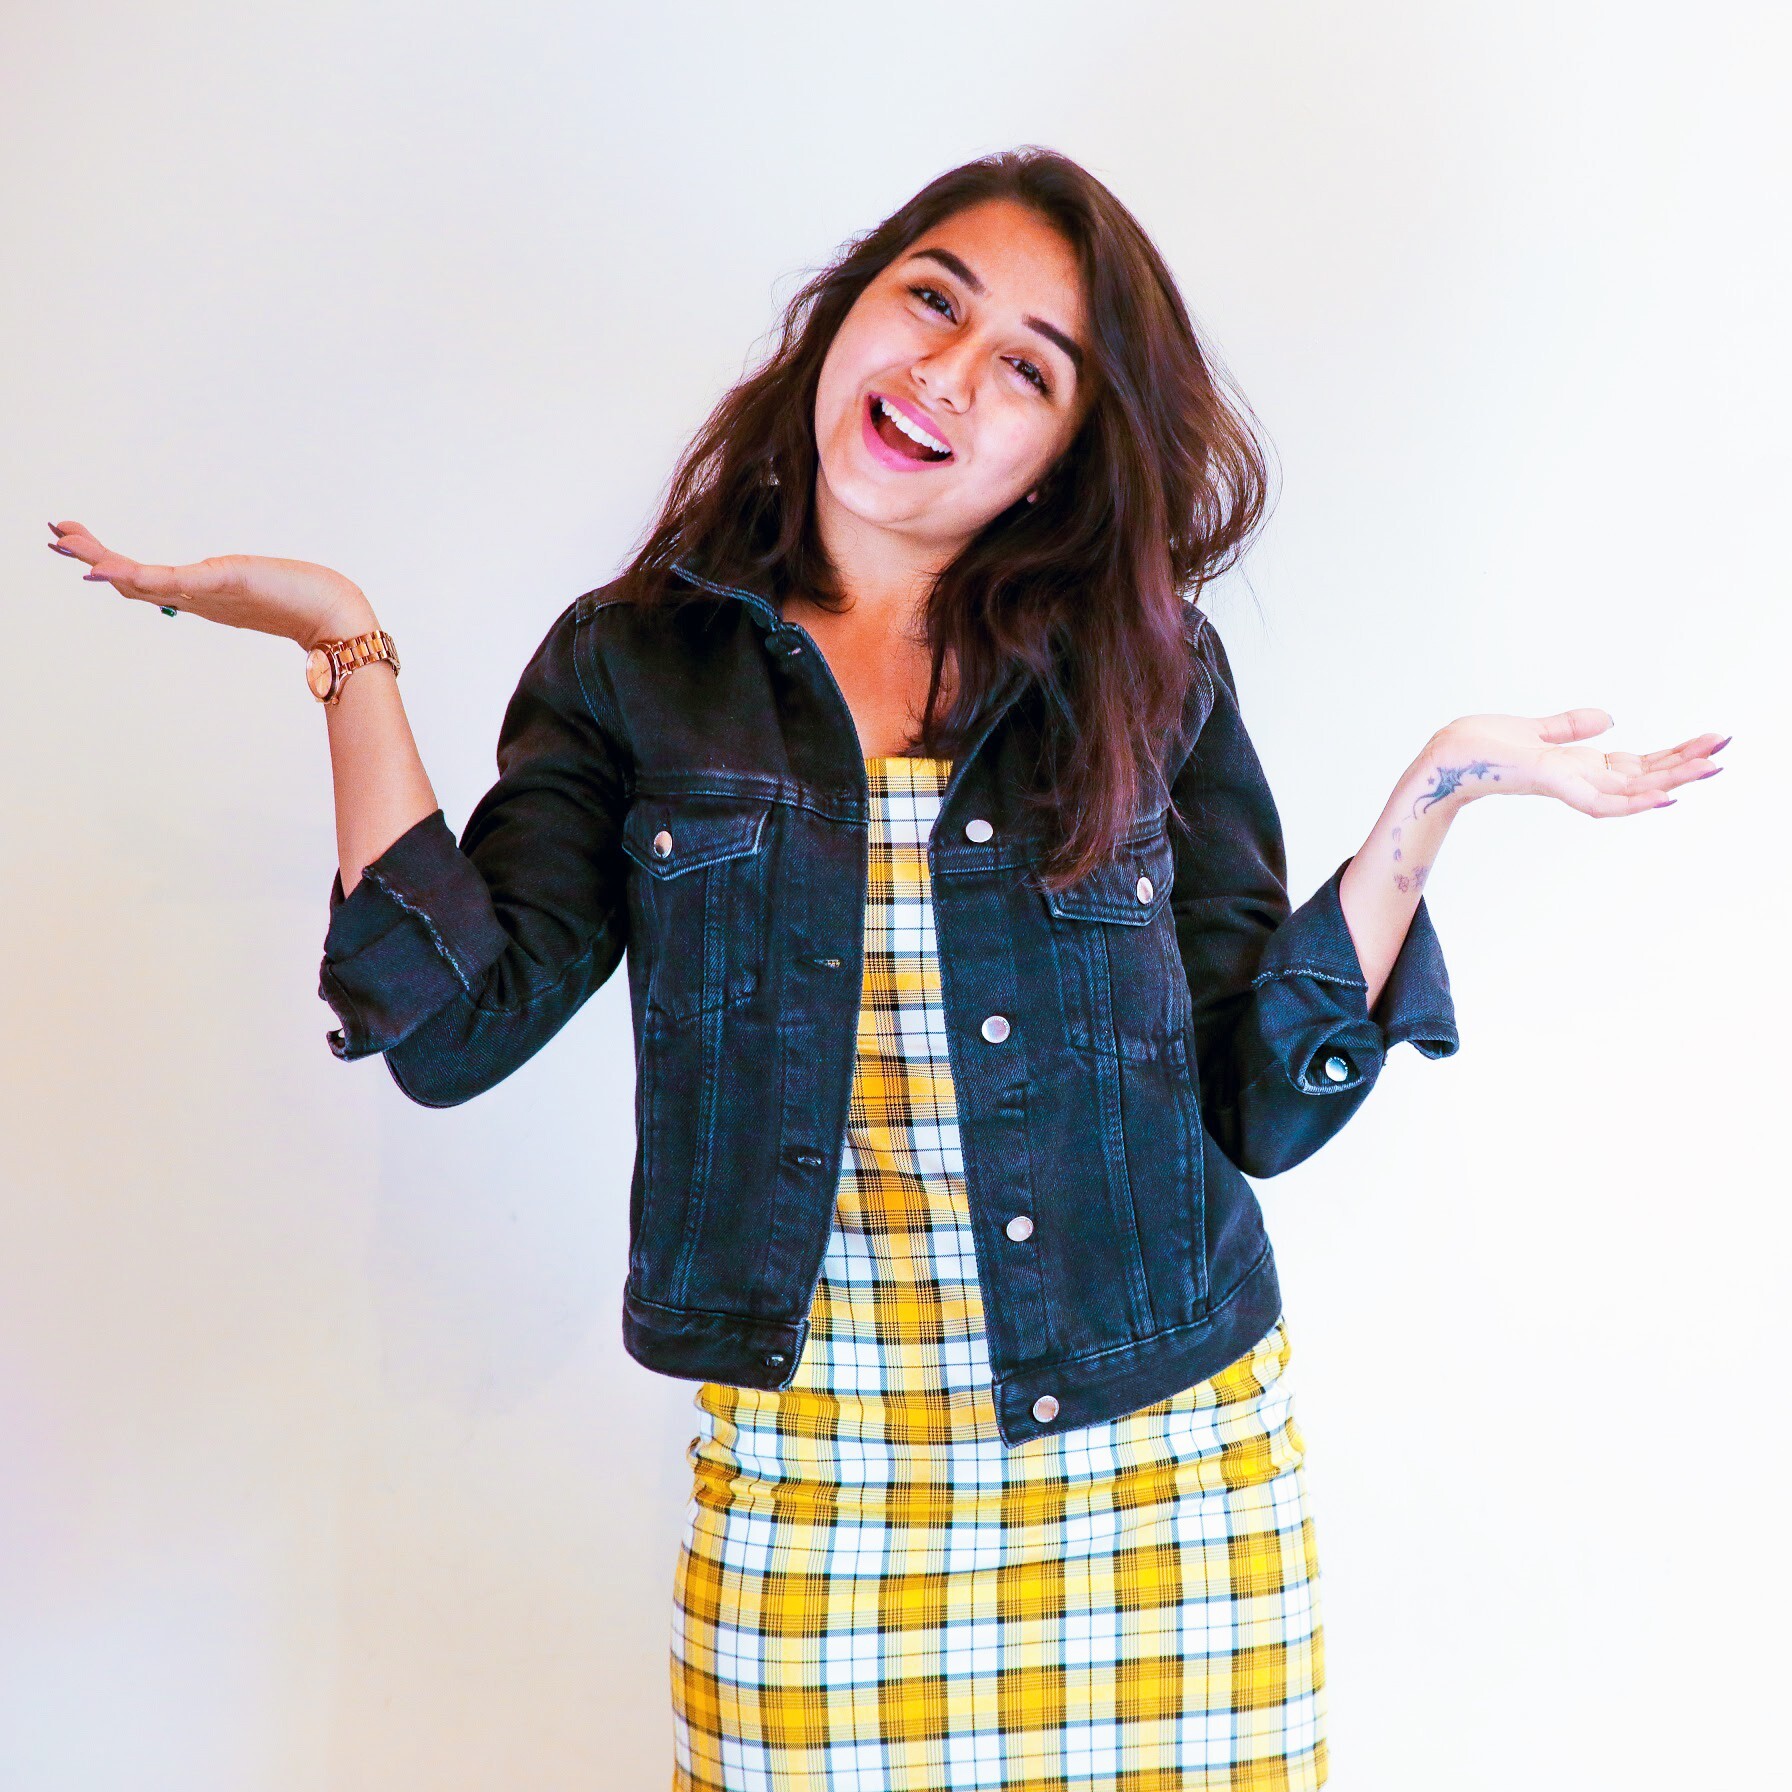 Prajakta Koli is the creator of India’s popular comedy YouTube channel MostlySane. She has also used her influence to tackle social issues that teenagers are facing today. Photo: courtesy of Prajakta Koli